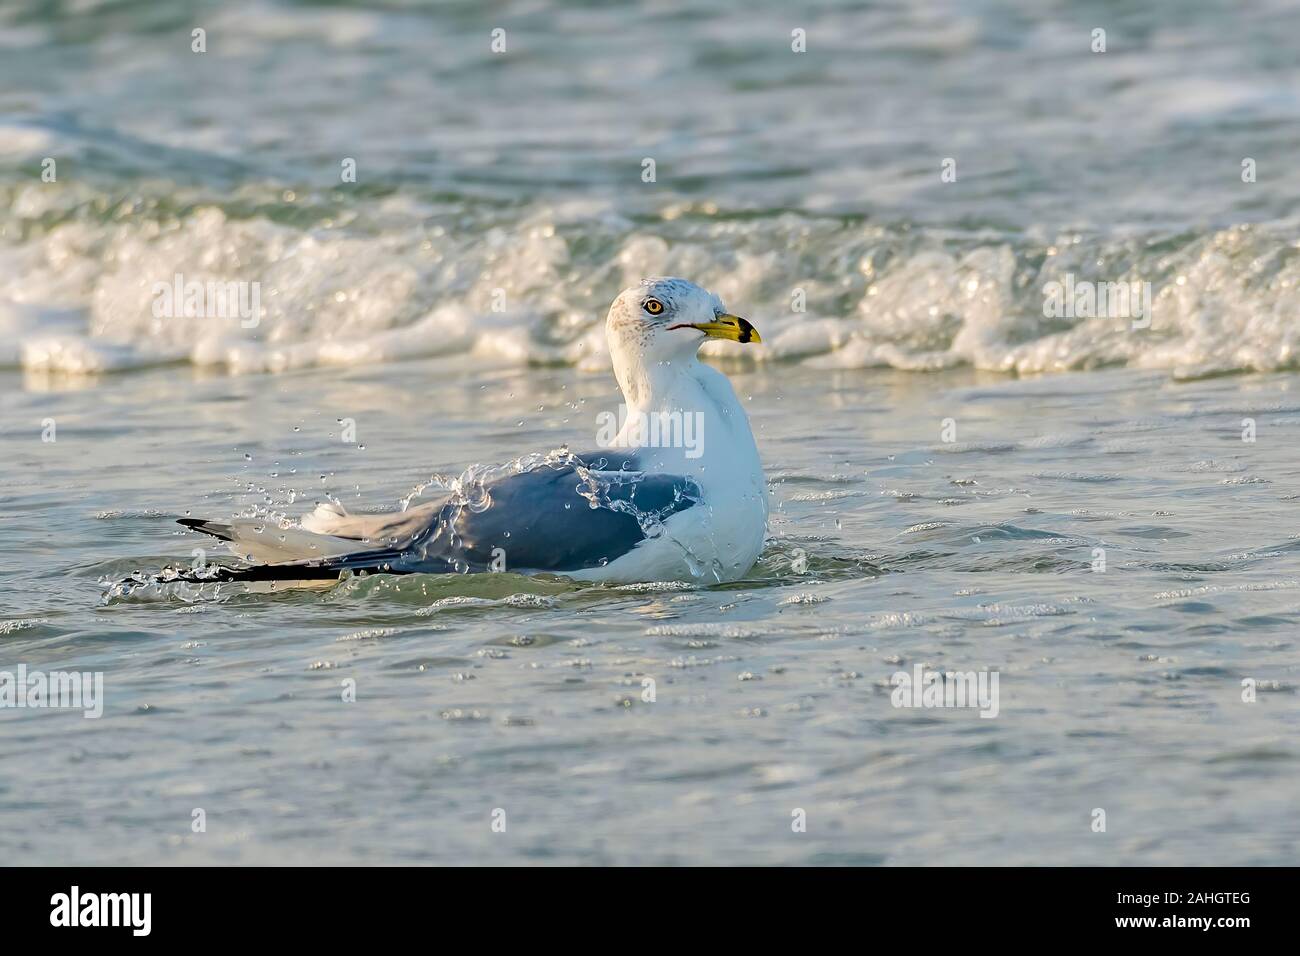 Black ring billed gull bathing at the Gulf of Mexico beach in Florida Stock Photo